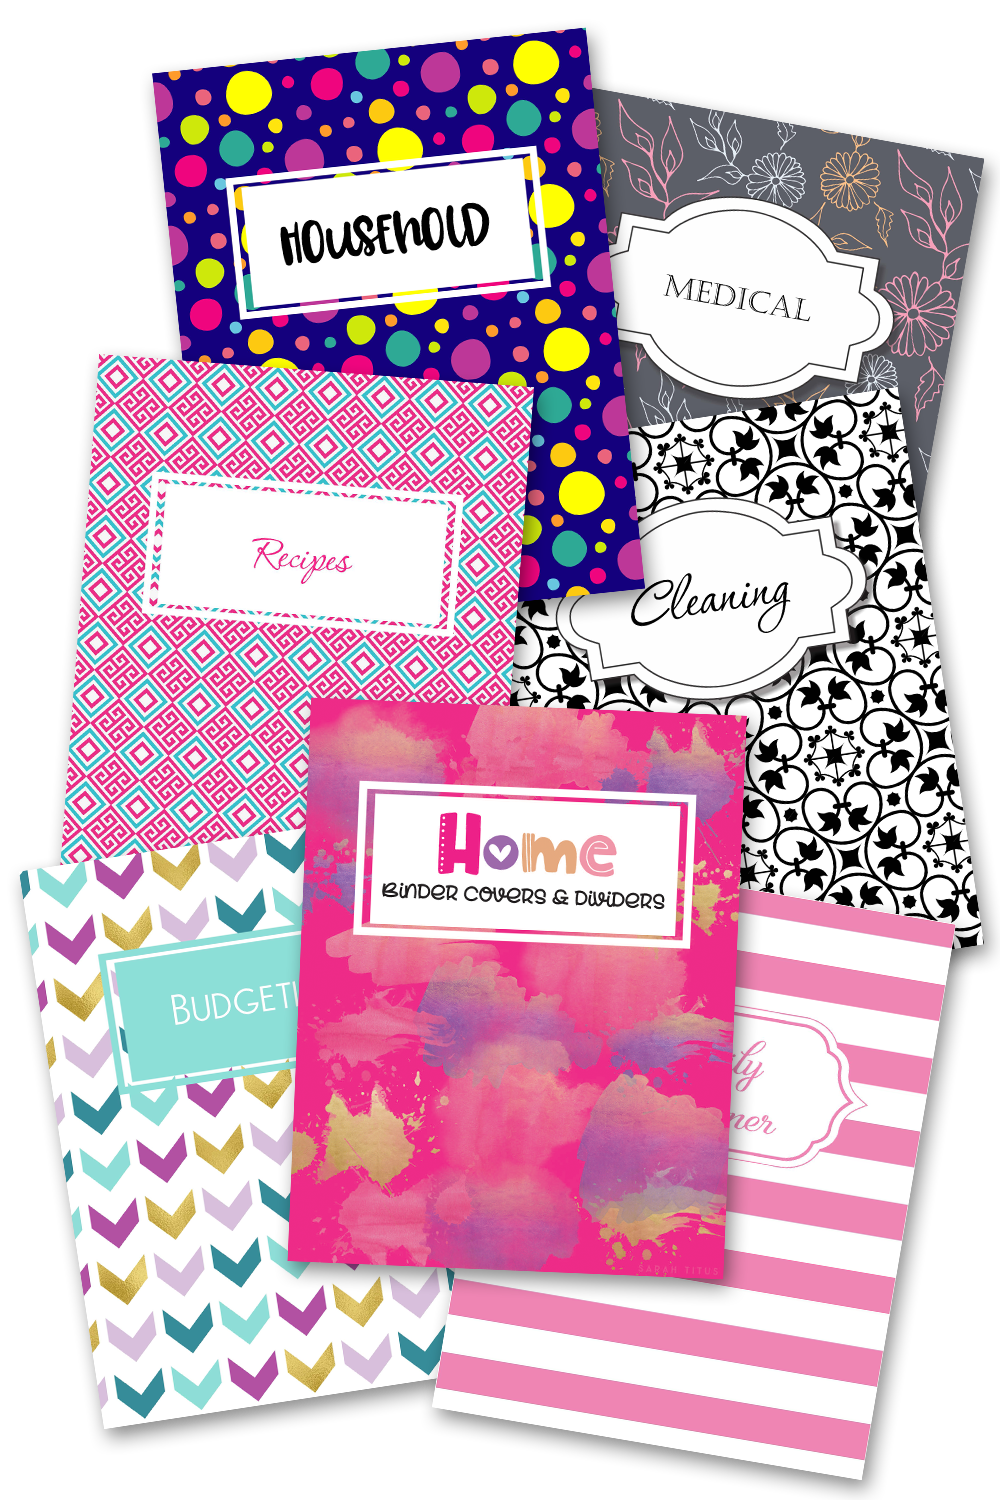 Home Binder Covers & Dividers